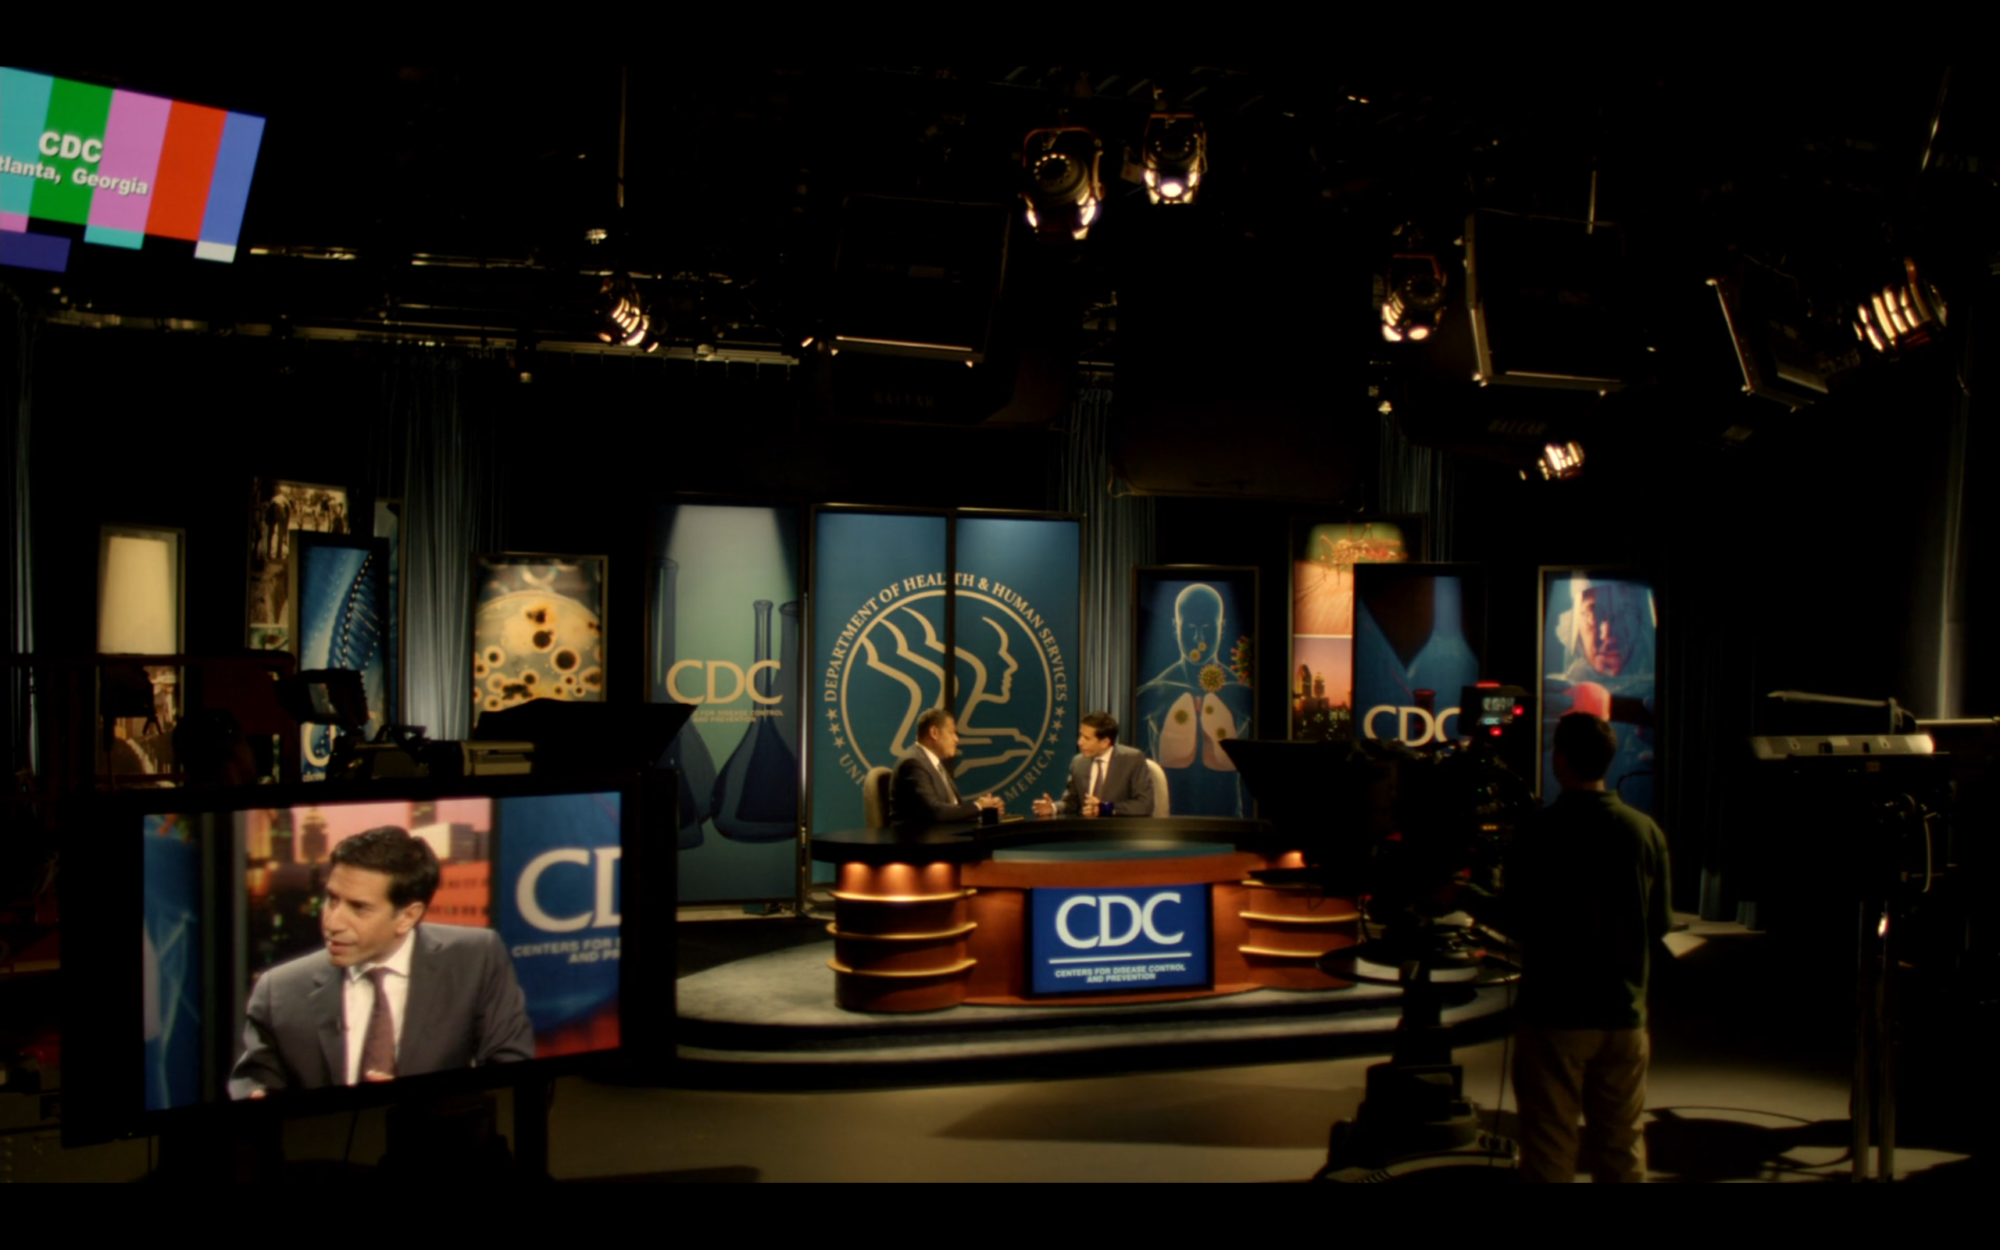 Shot of what appears to be the filming of a news segment broadcasted from the CDC